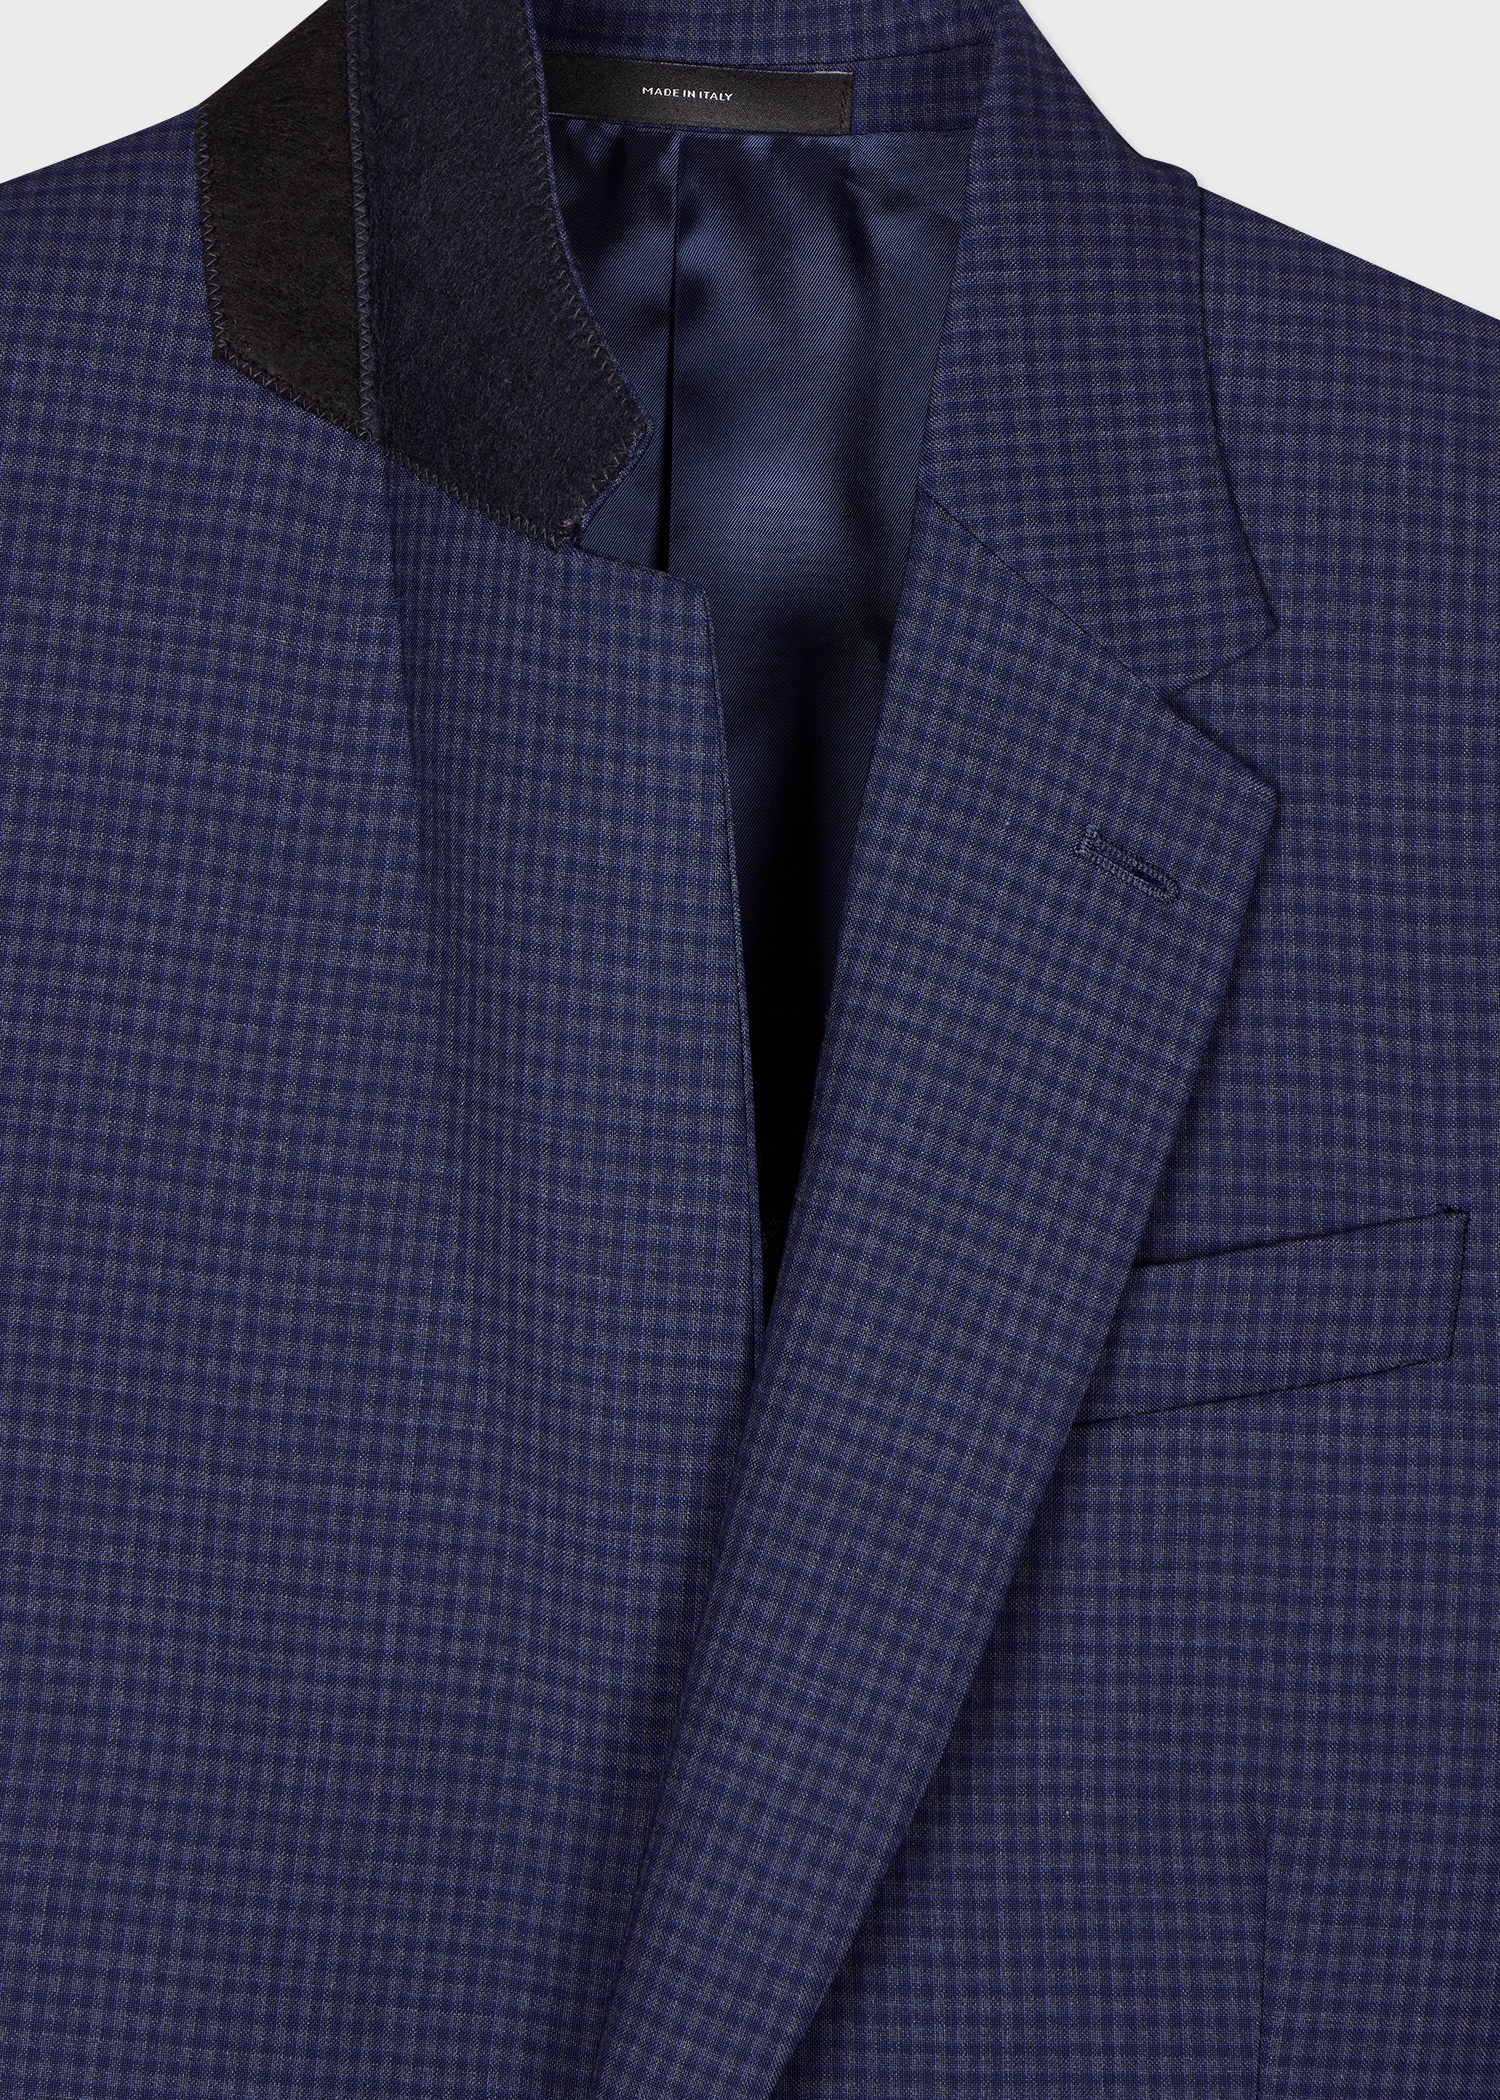 The Soho - Tailored-Fit Blue Gingham Wool Blazer - 2